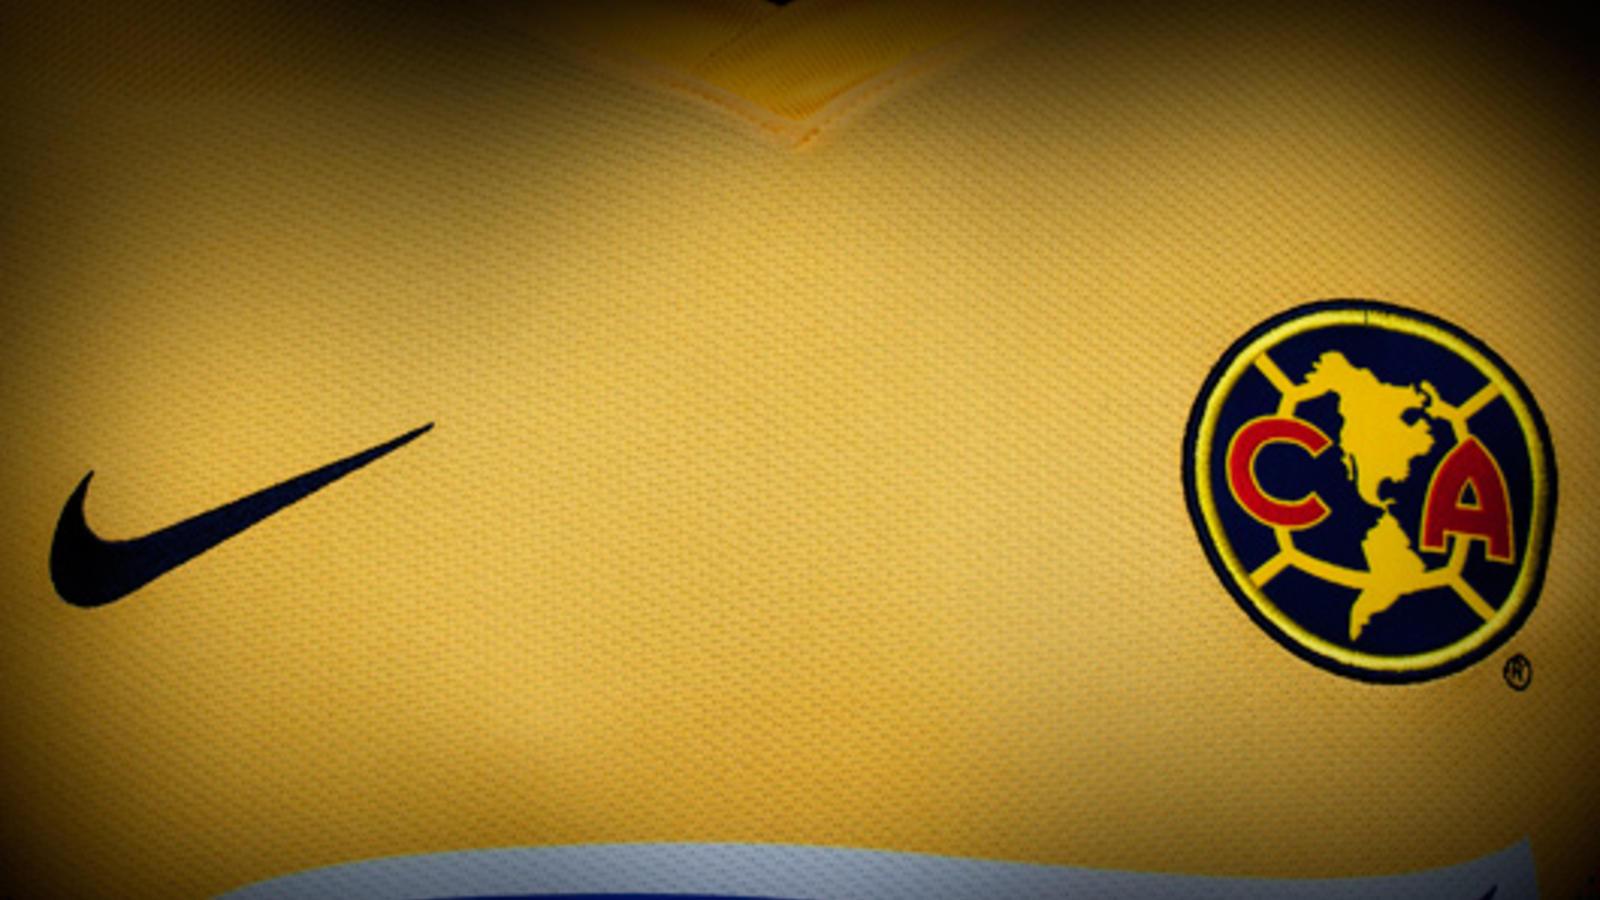 Wallpapers Del America 56 Image Collections Of Wallpapers - Club America Wallpaper 2017 , HD Wallpaper & Backgrounds